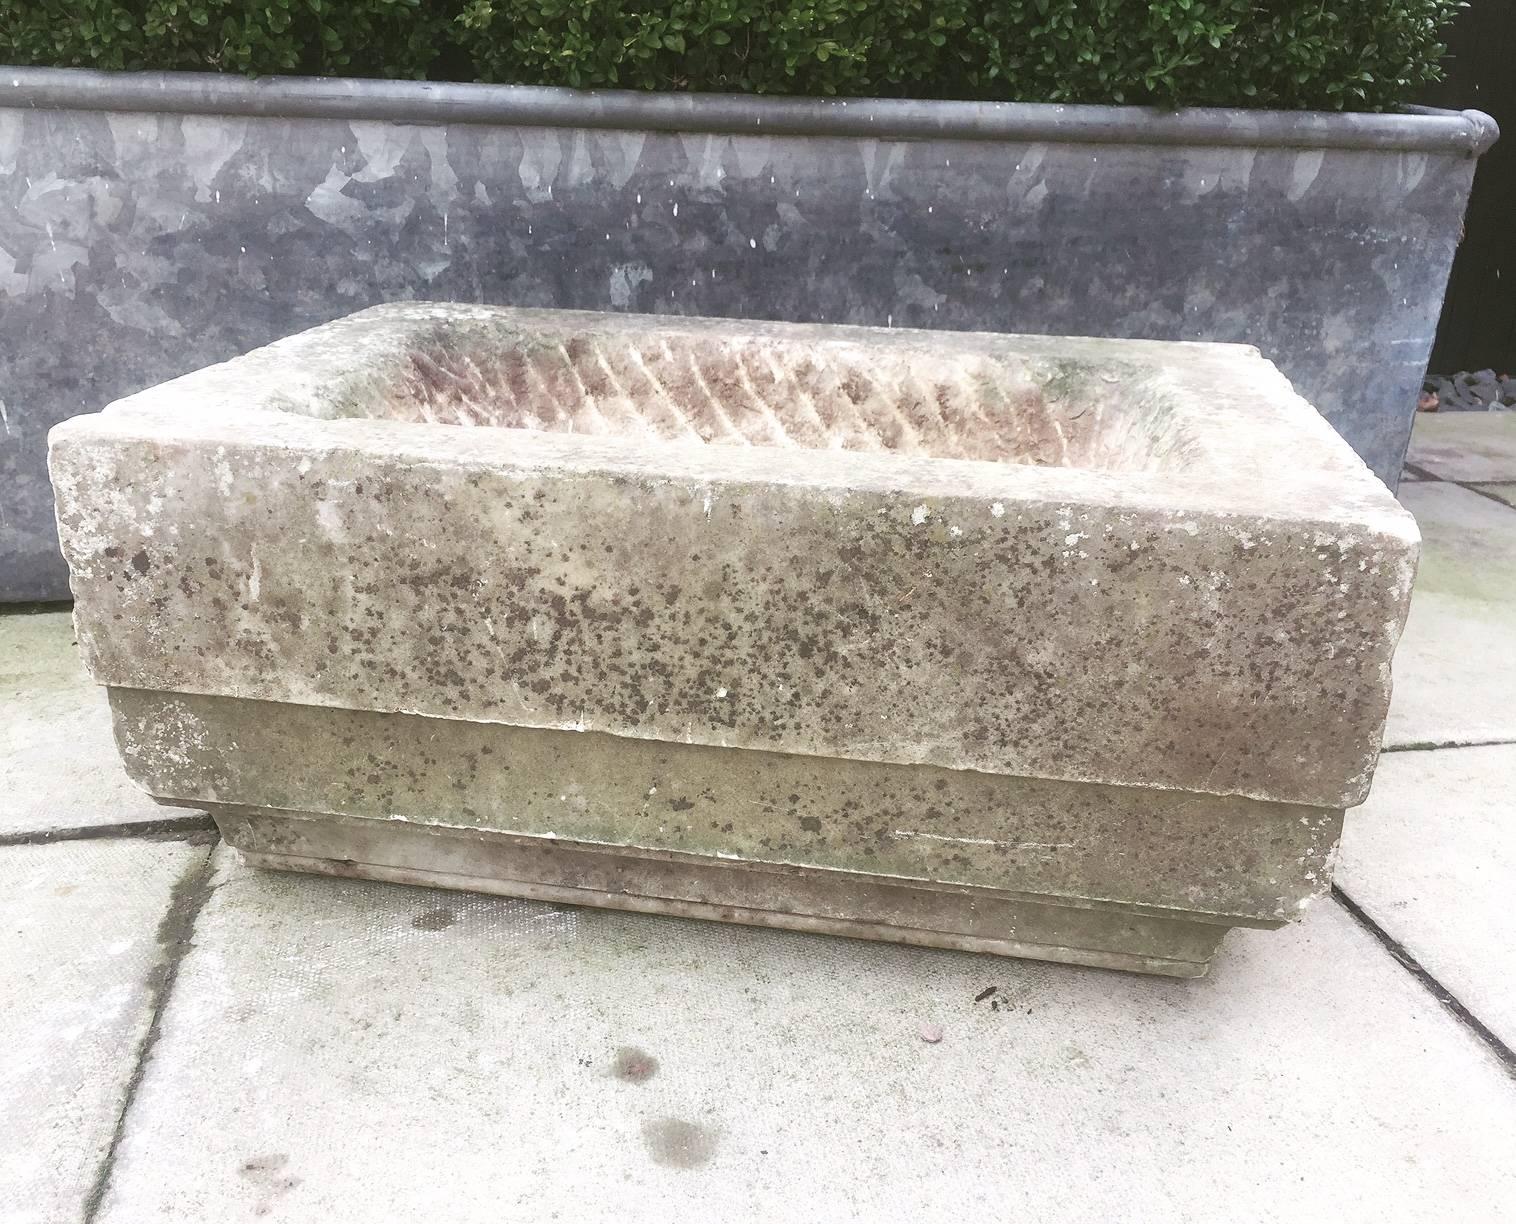 Antique hand-carved marble trough with a wonderful aged patina.